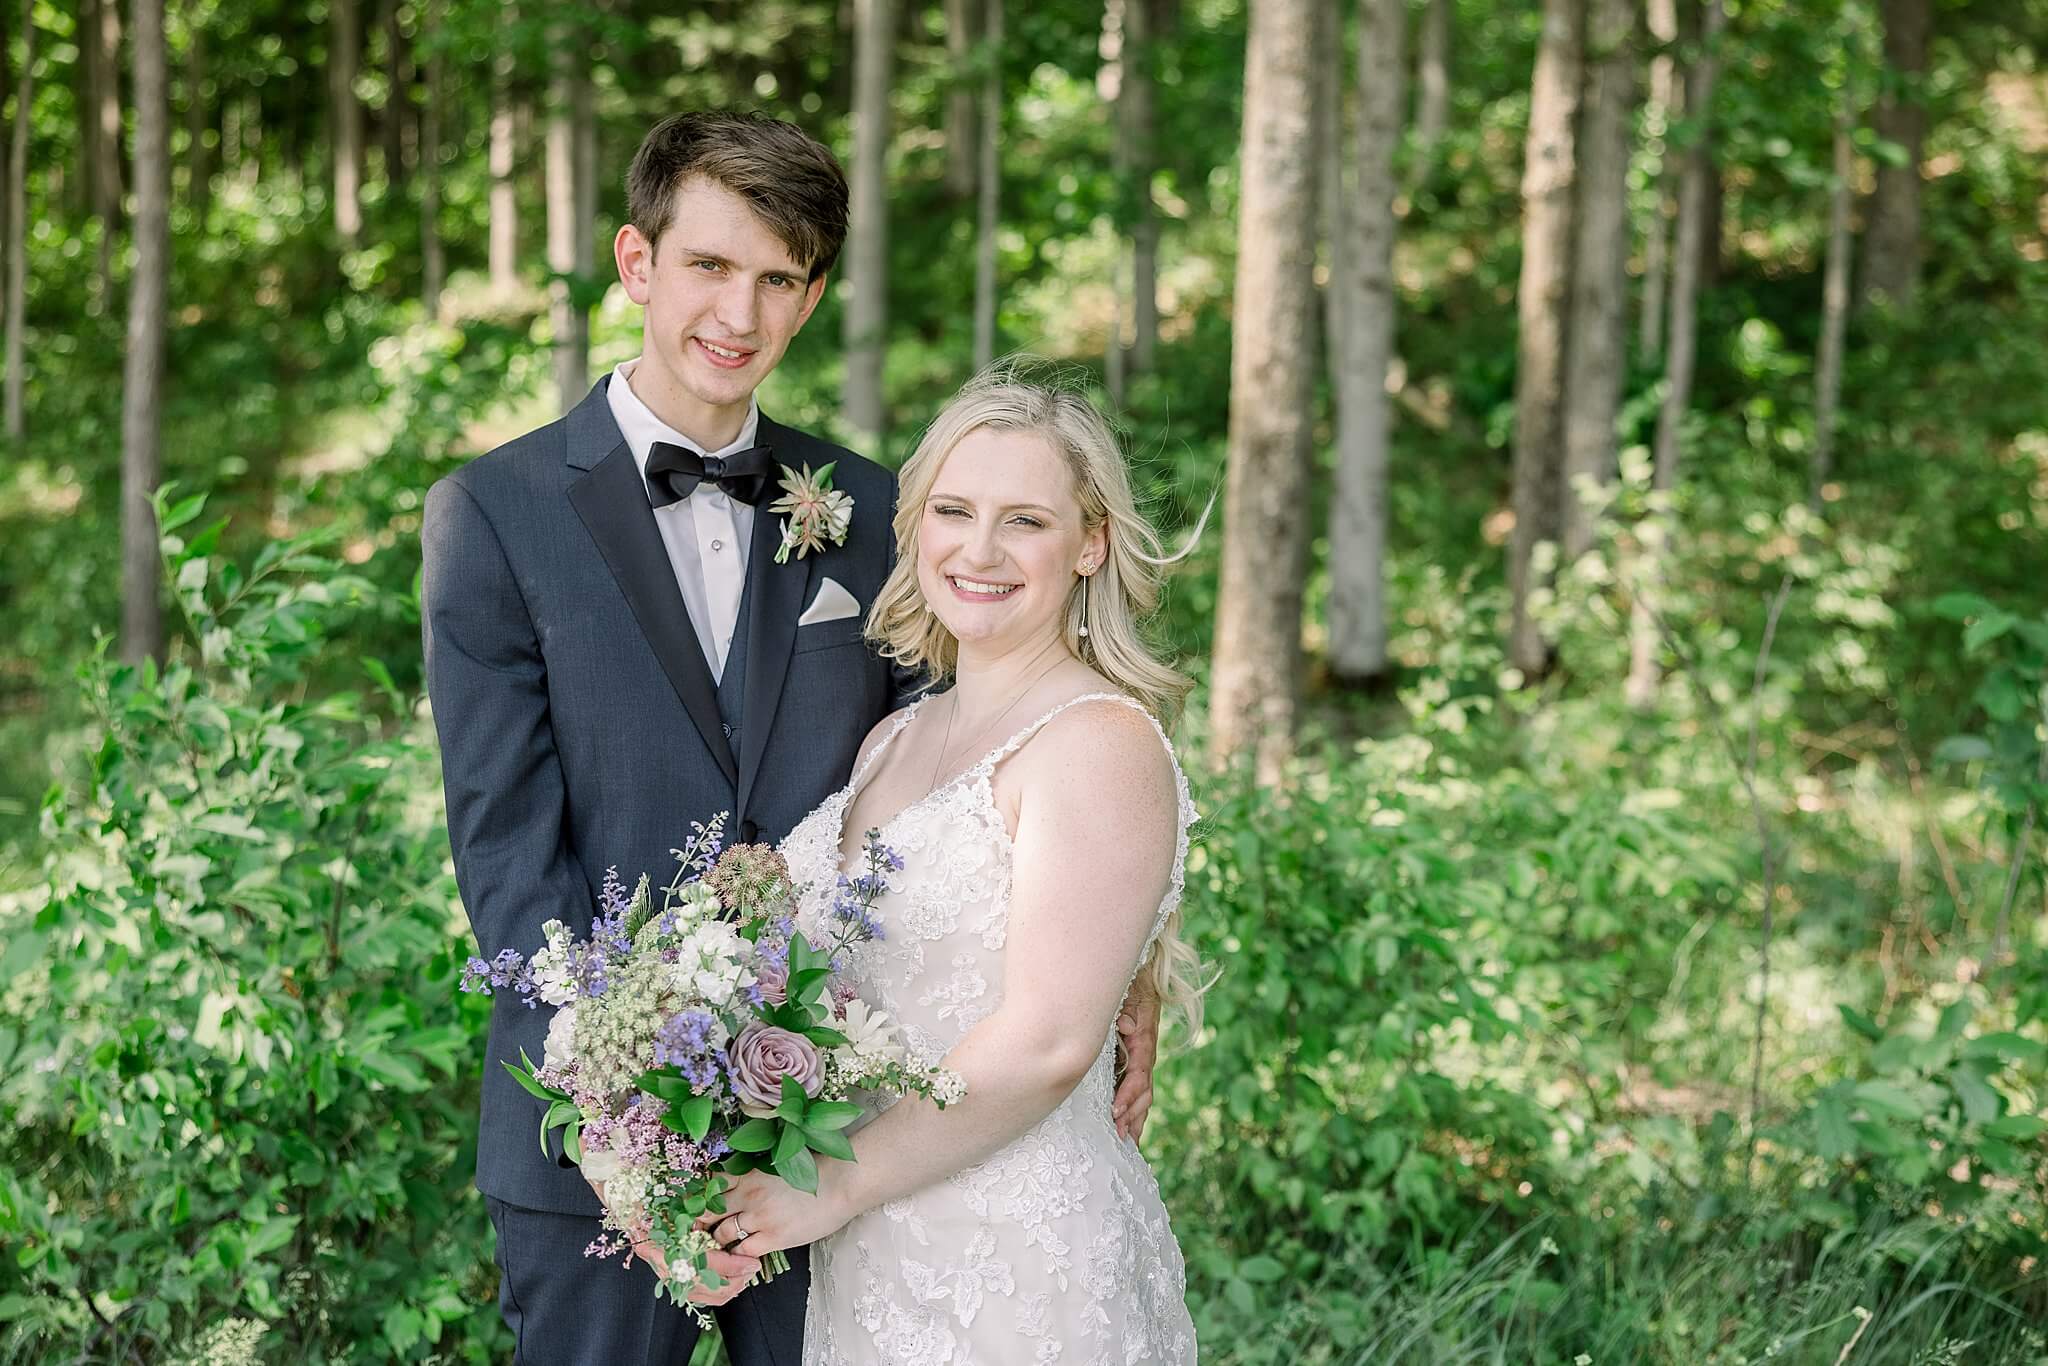 Bride and groom smiling in forest at Nature Michigan wedding.